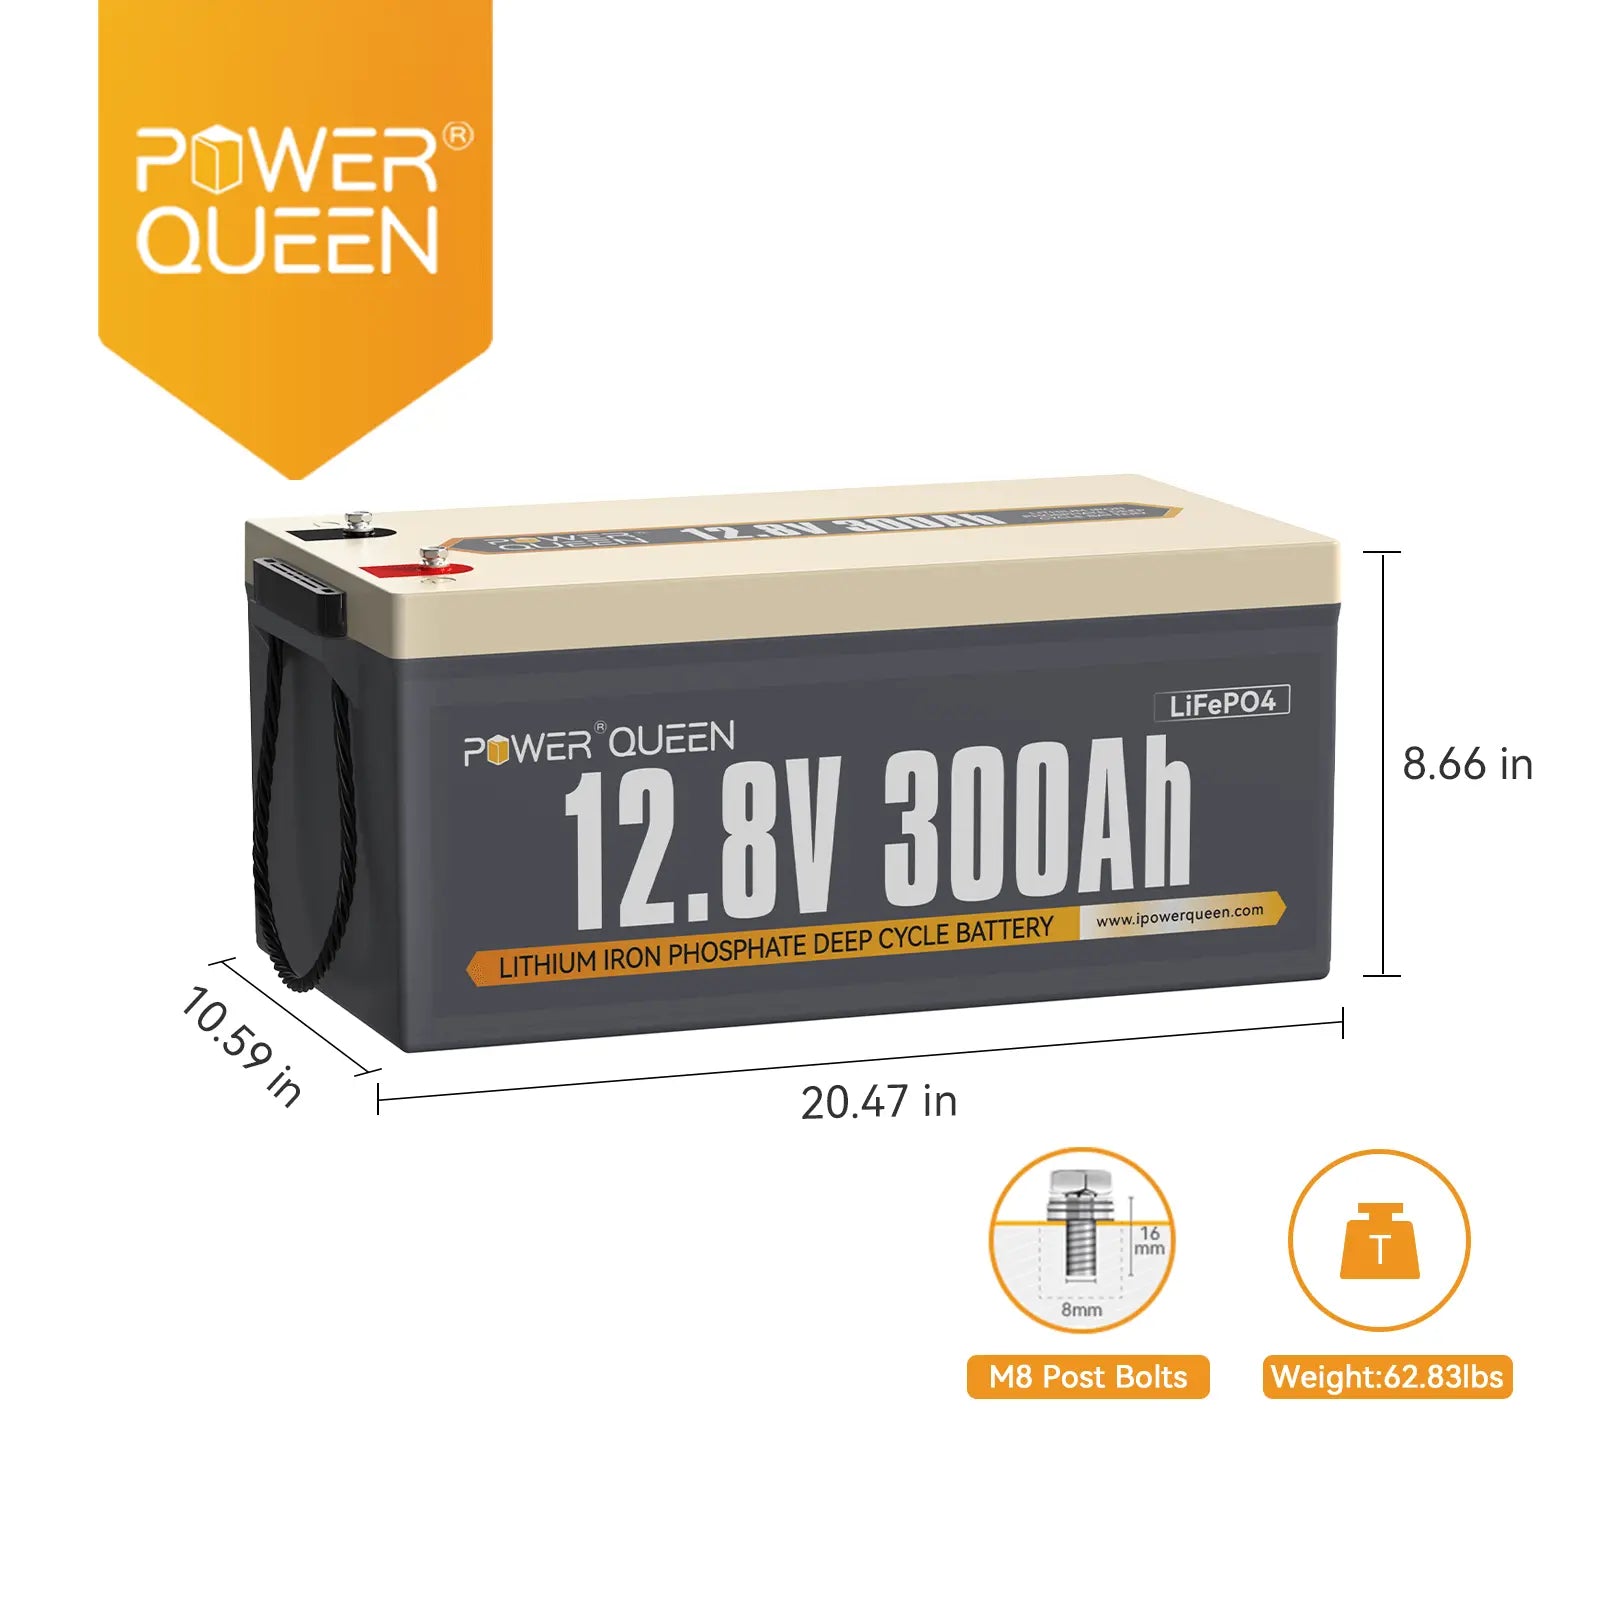 Power-Queen-12V-300Ah-LiFePO4-Battery-dimension-Group-4D